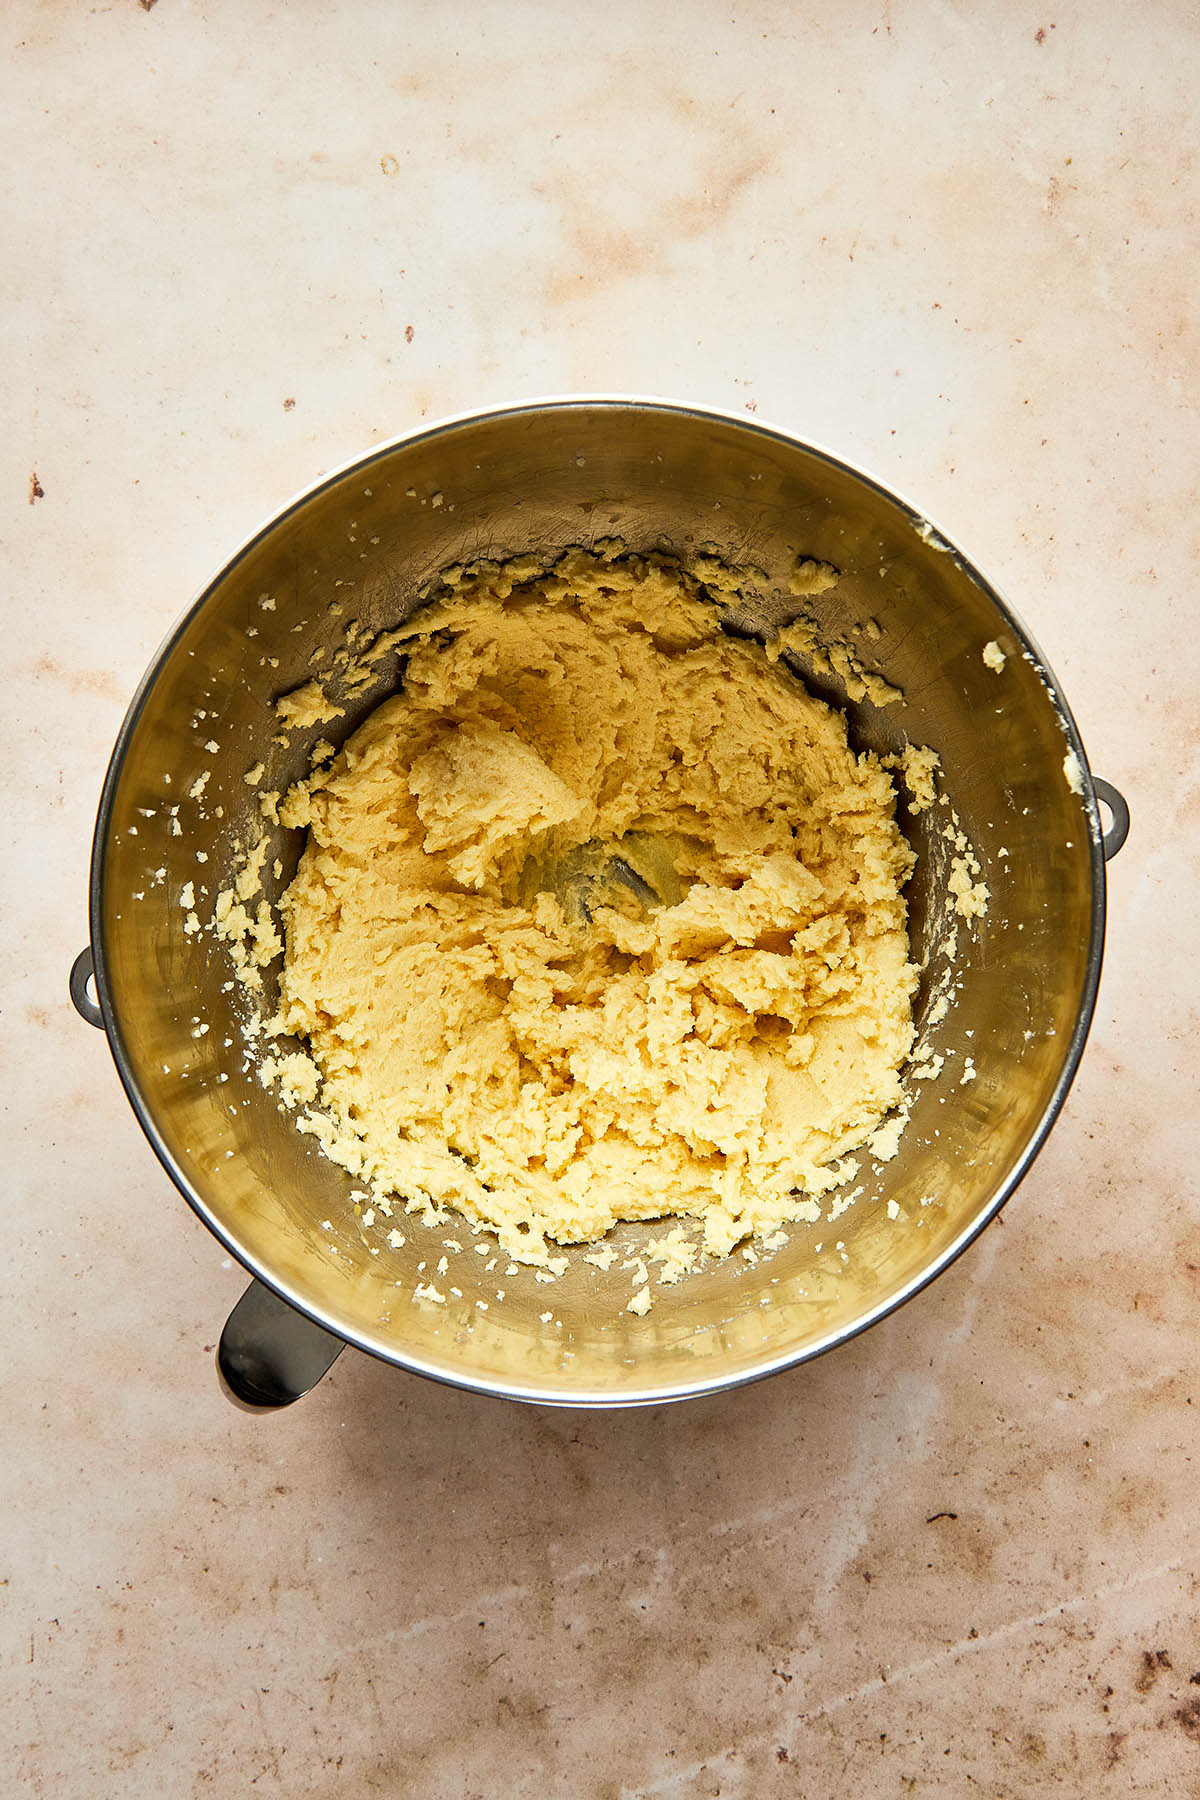 Mixed wet cookie dough ingredients in a metal mixing bowl.